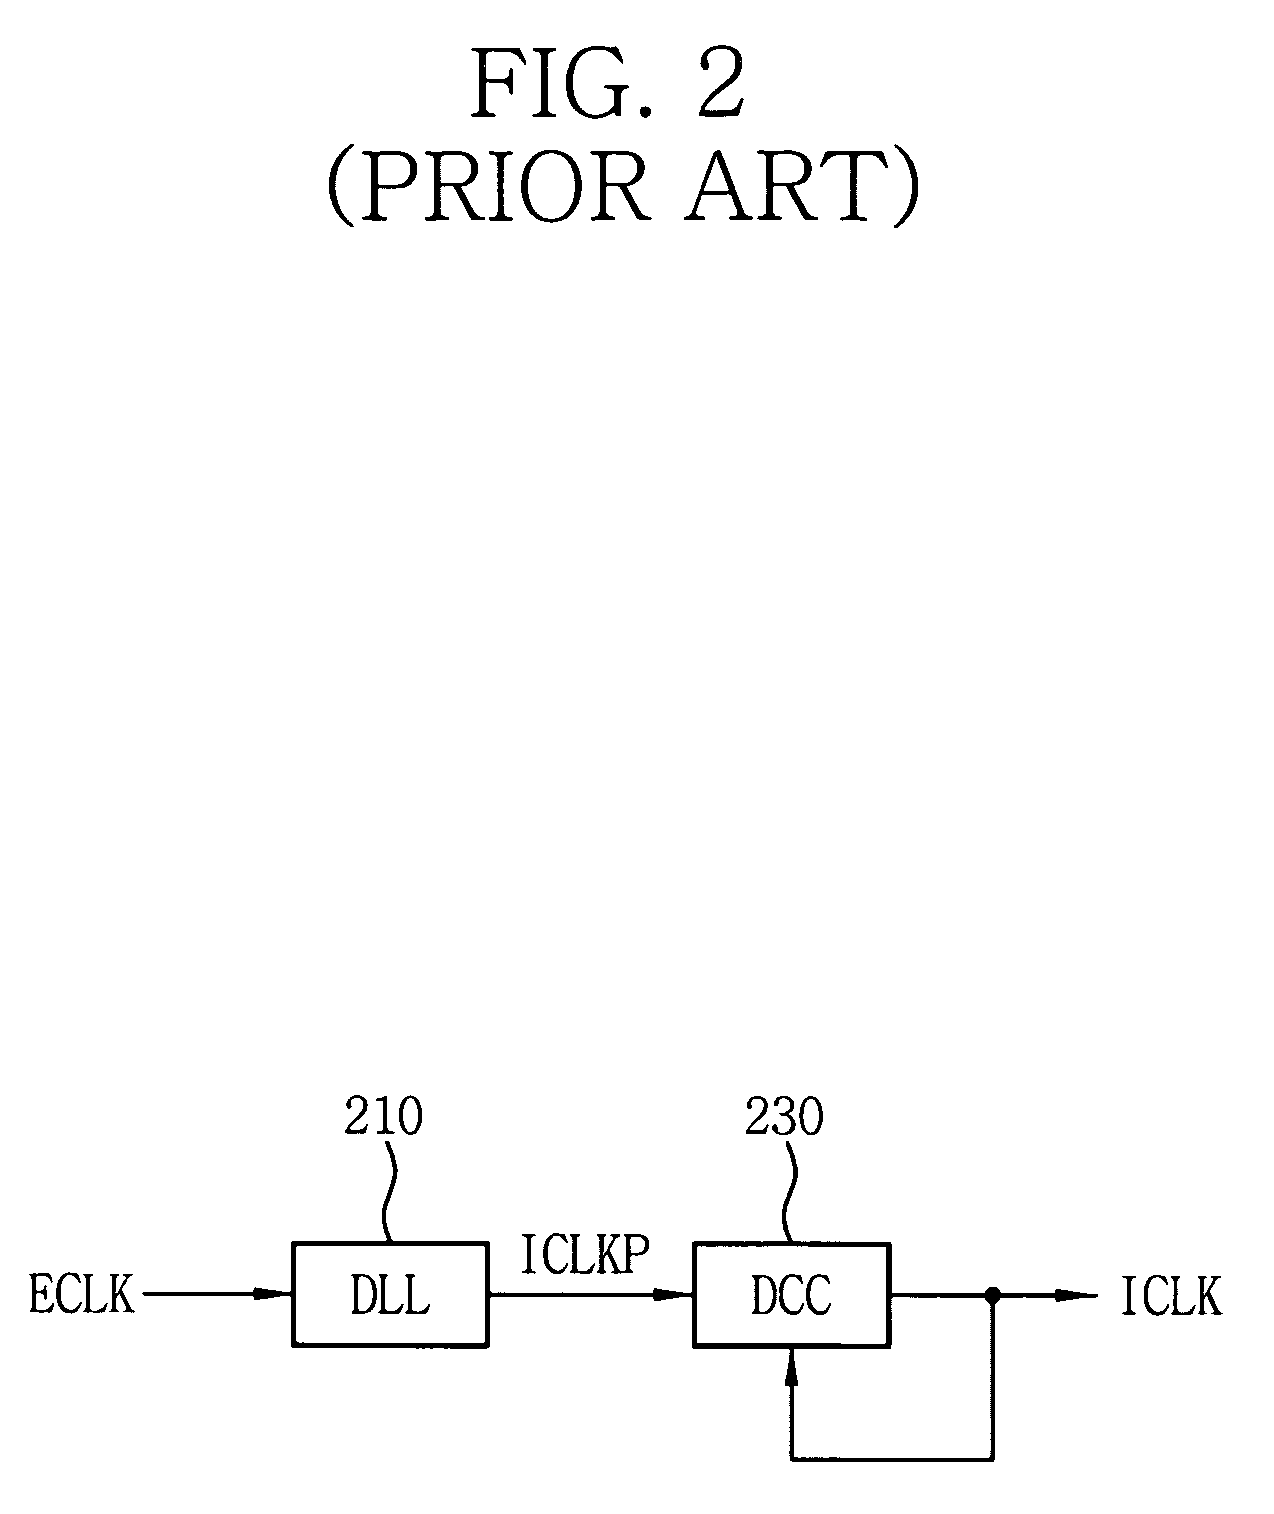 Duty cycle correction circuits suitable for use in delay-locked loops and methods of correcting duty cycles of periodic signals